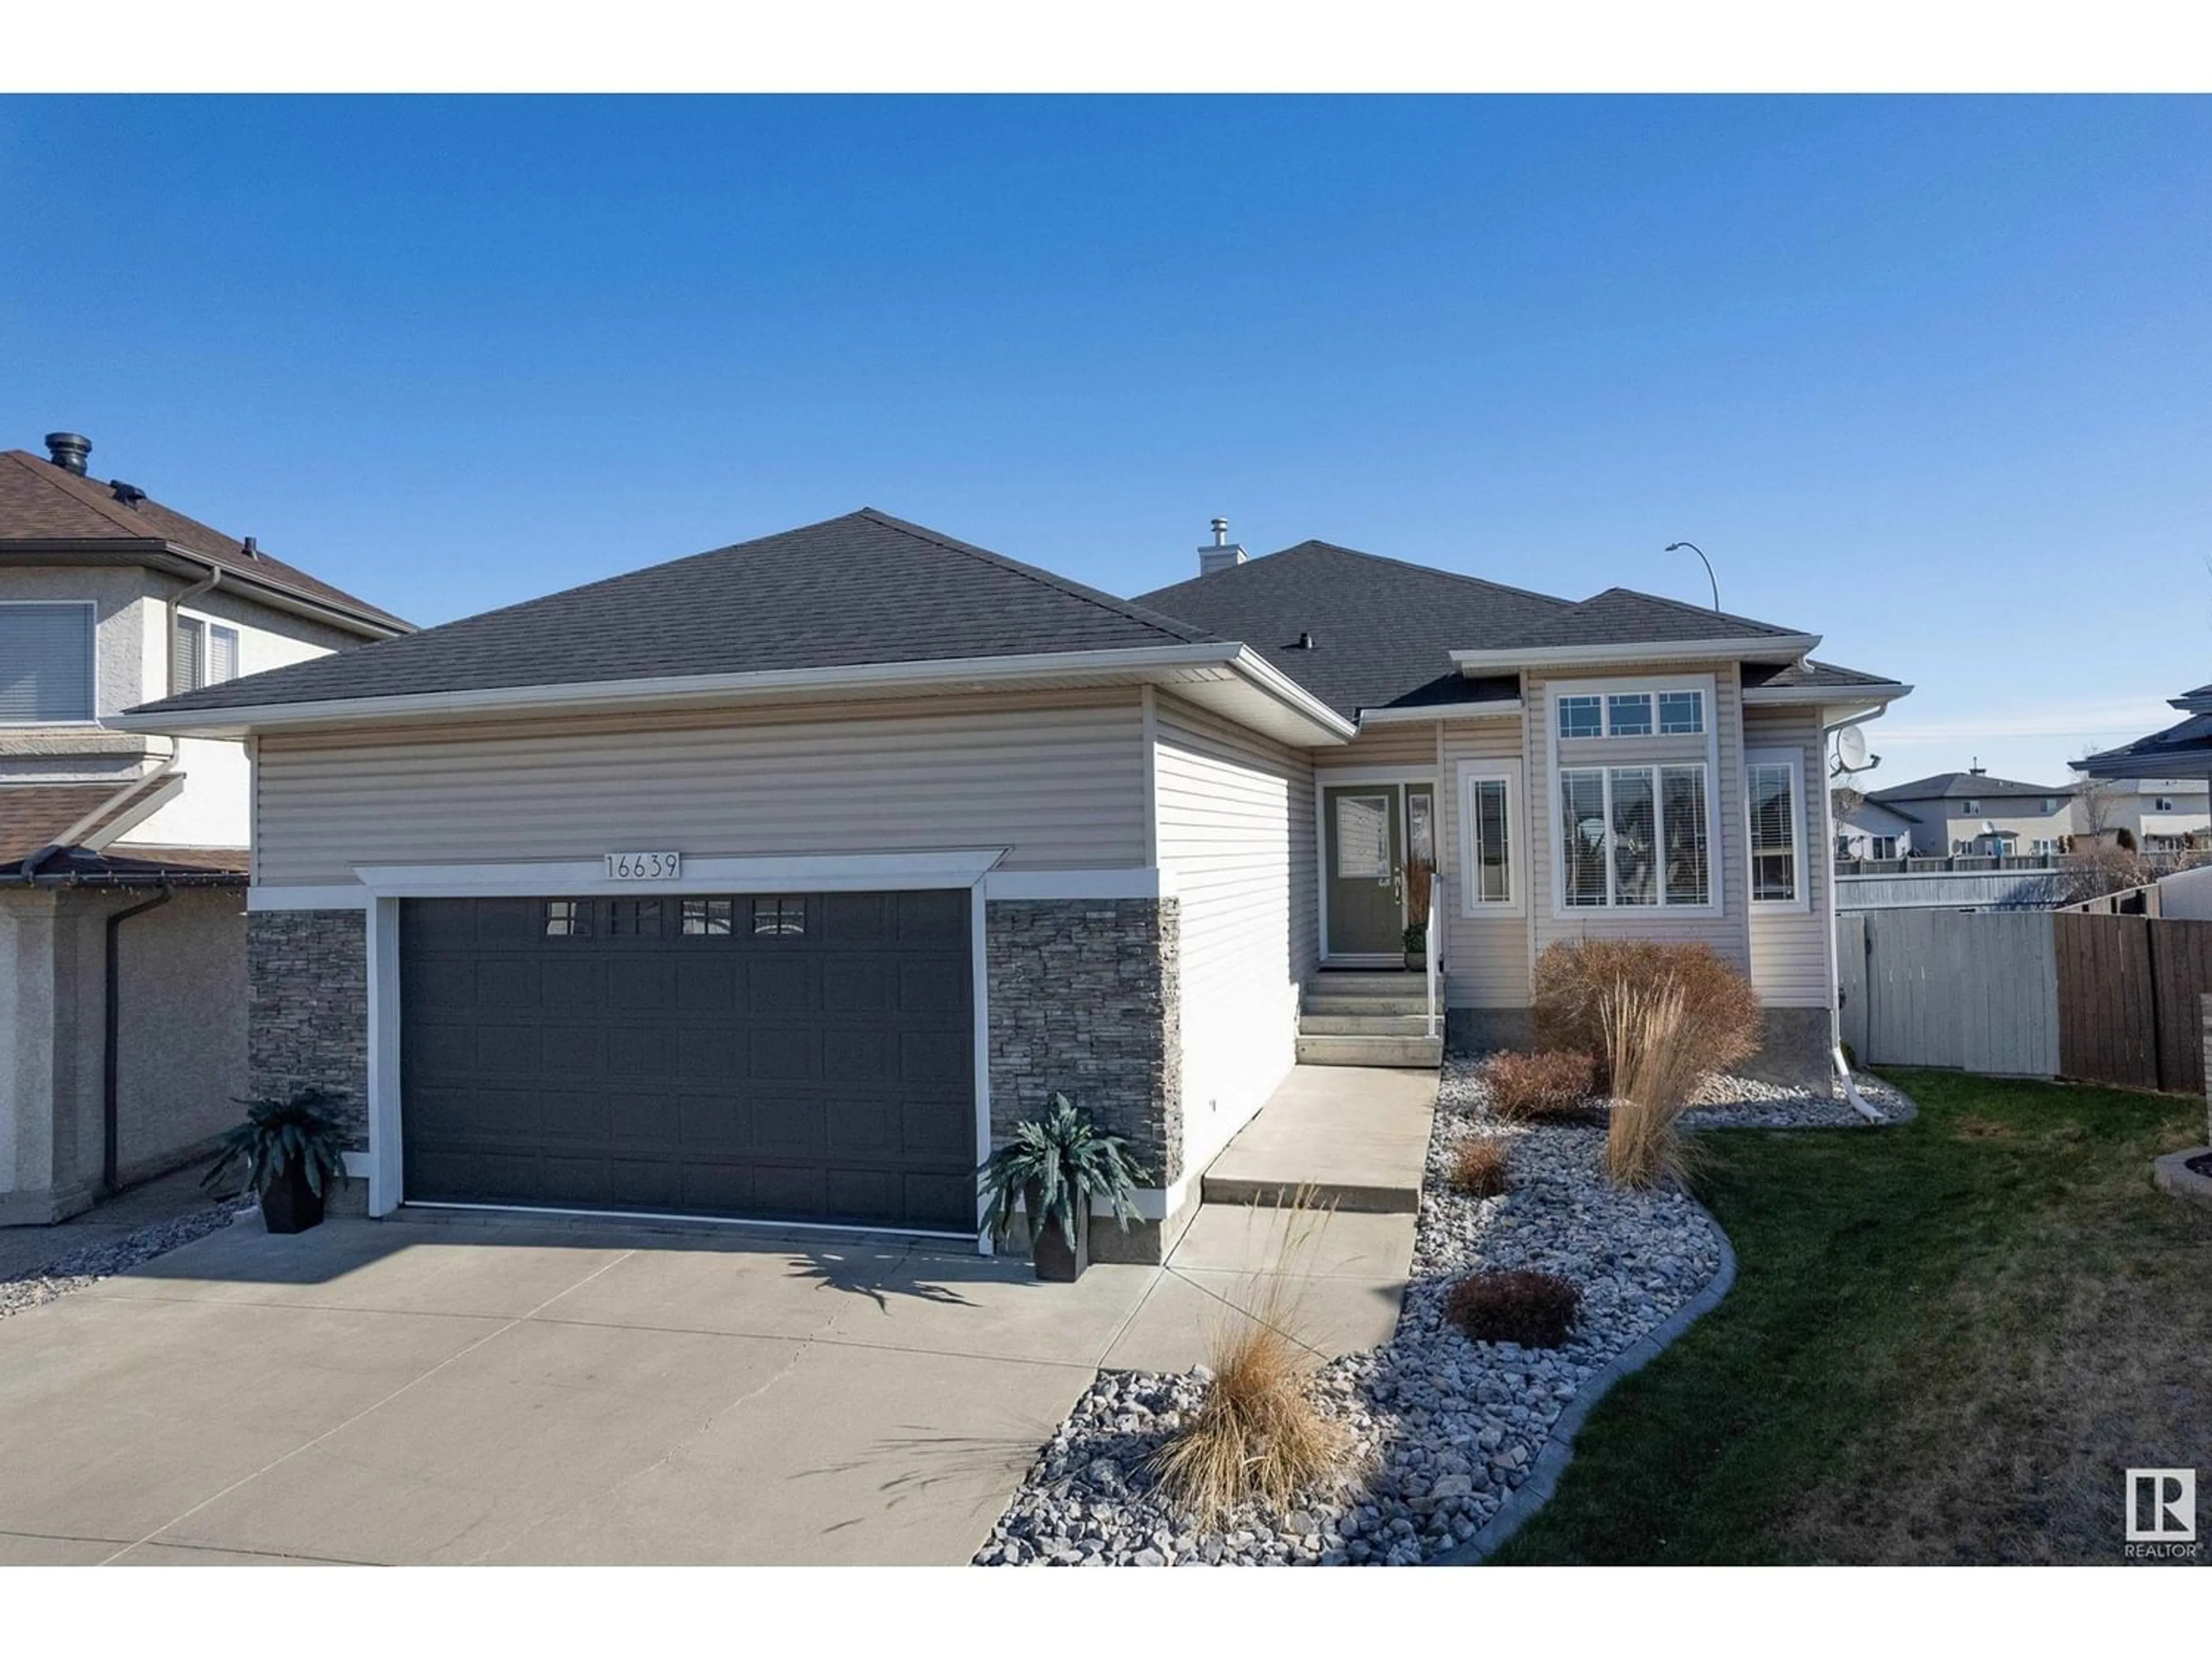 Frontside or backside of a home for 16639 75 ST NW, Edmonton Alberta T5Z3R2